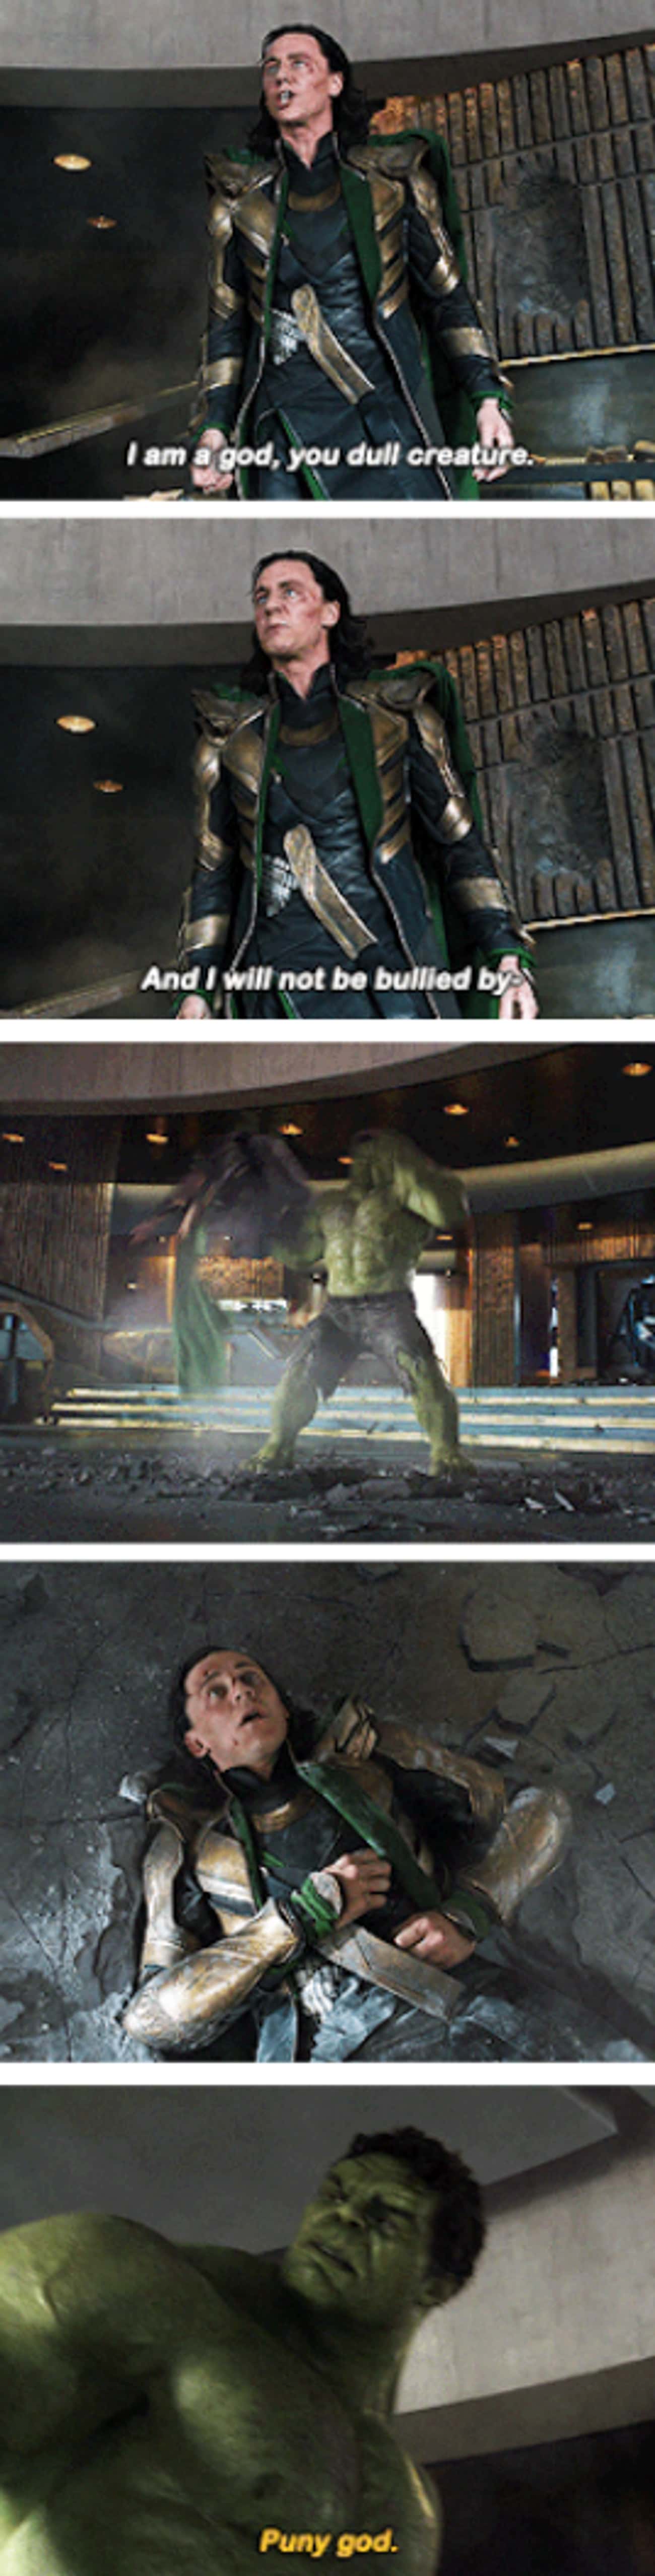 "And We Have The Hulk"